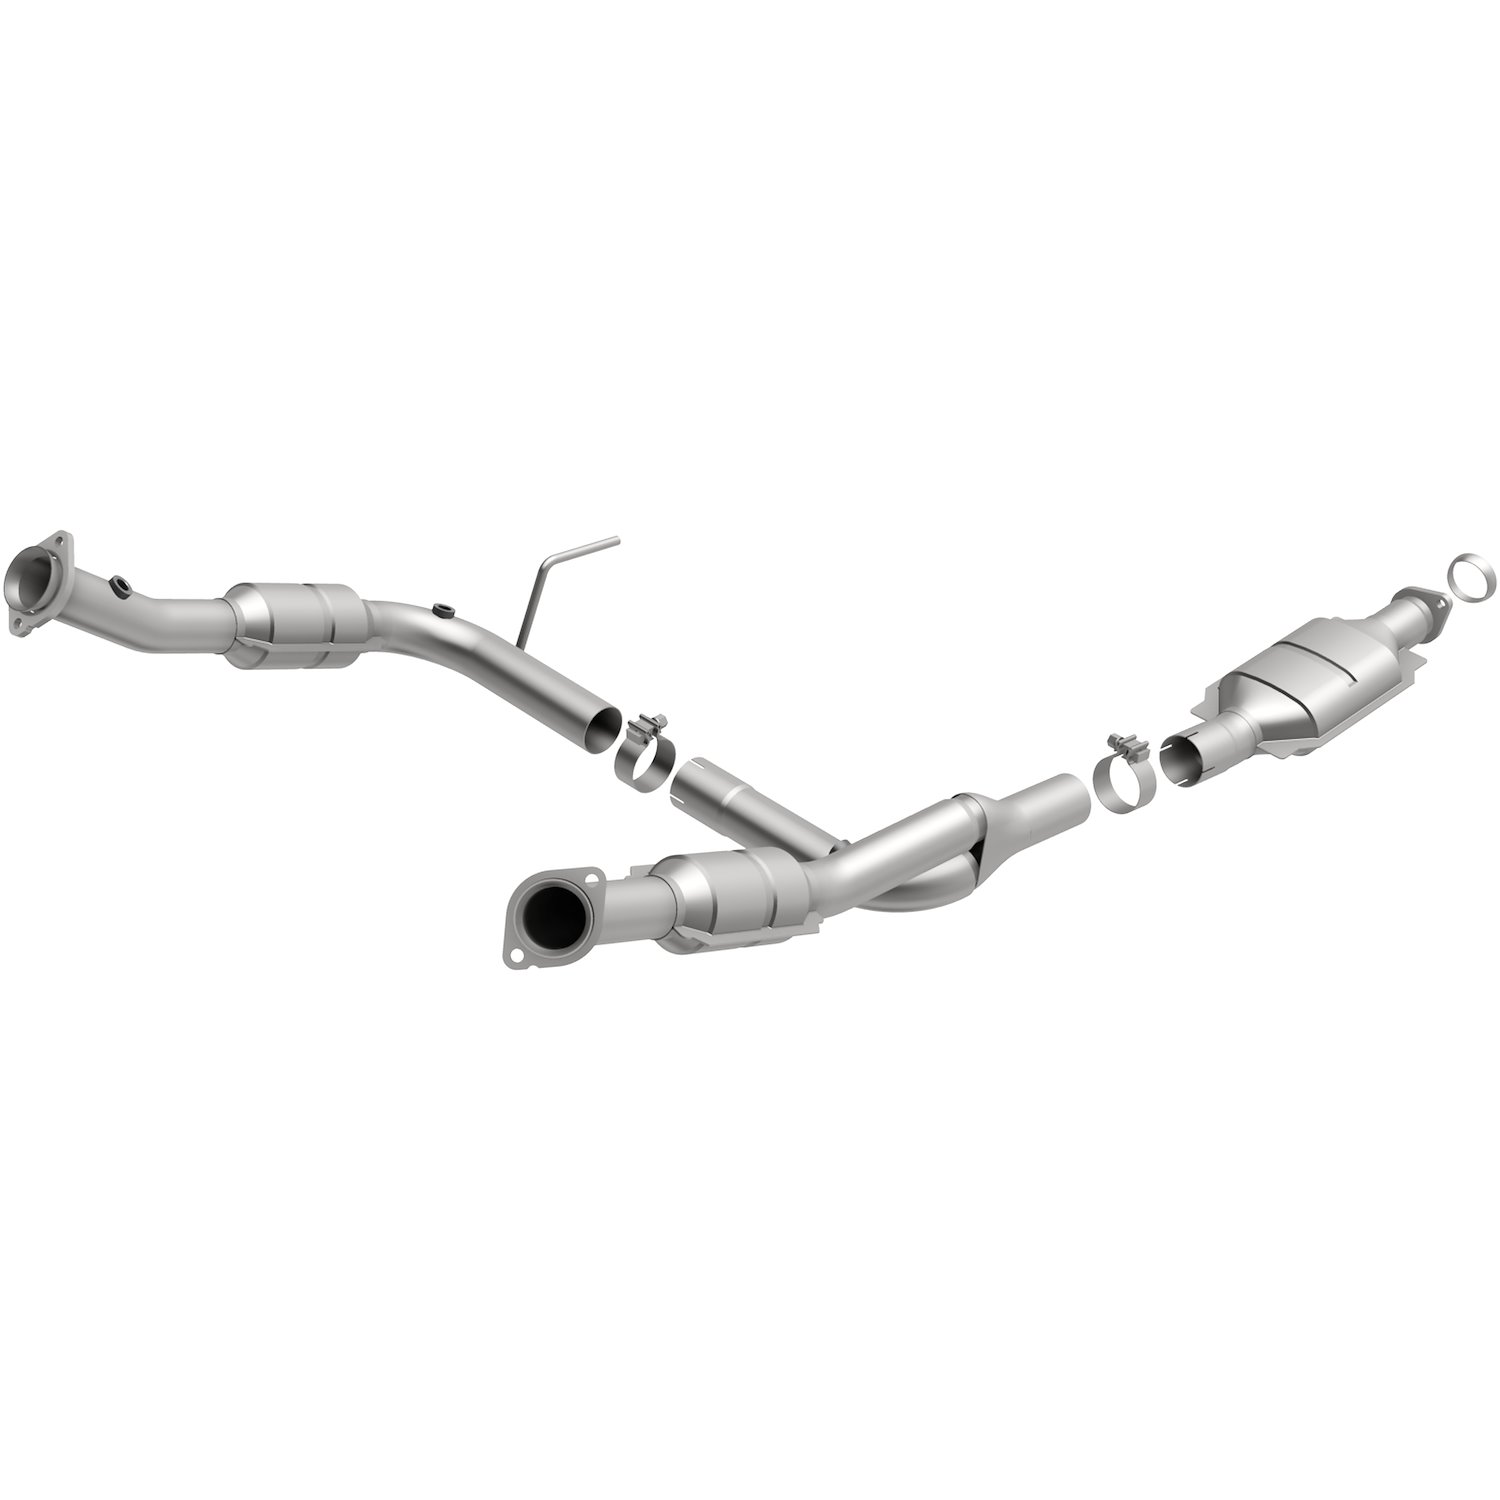 OEM Grade Federal / EPA Compliant Direct-Fit Catalytic Converter 49404